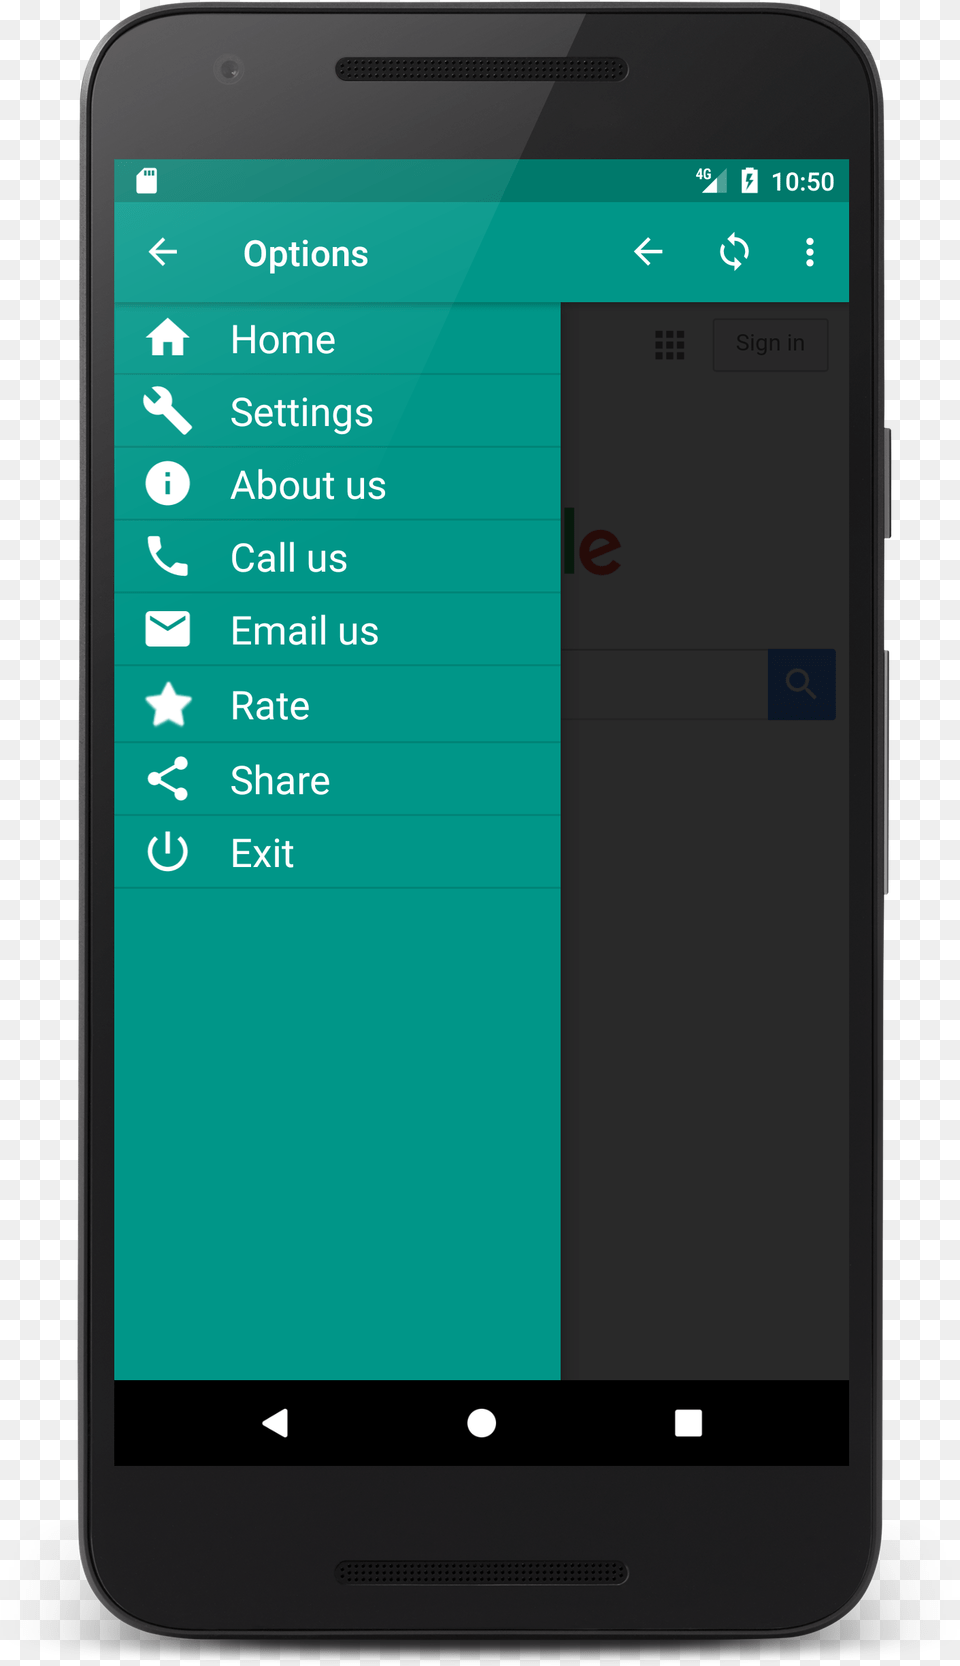 Webview Navigation Example In Android Studio, Electronics, Mobile Phone, Phone Png